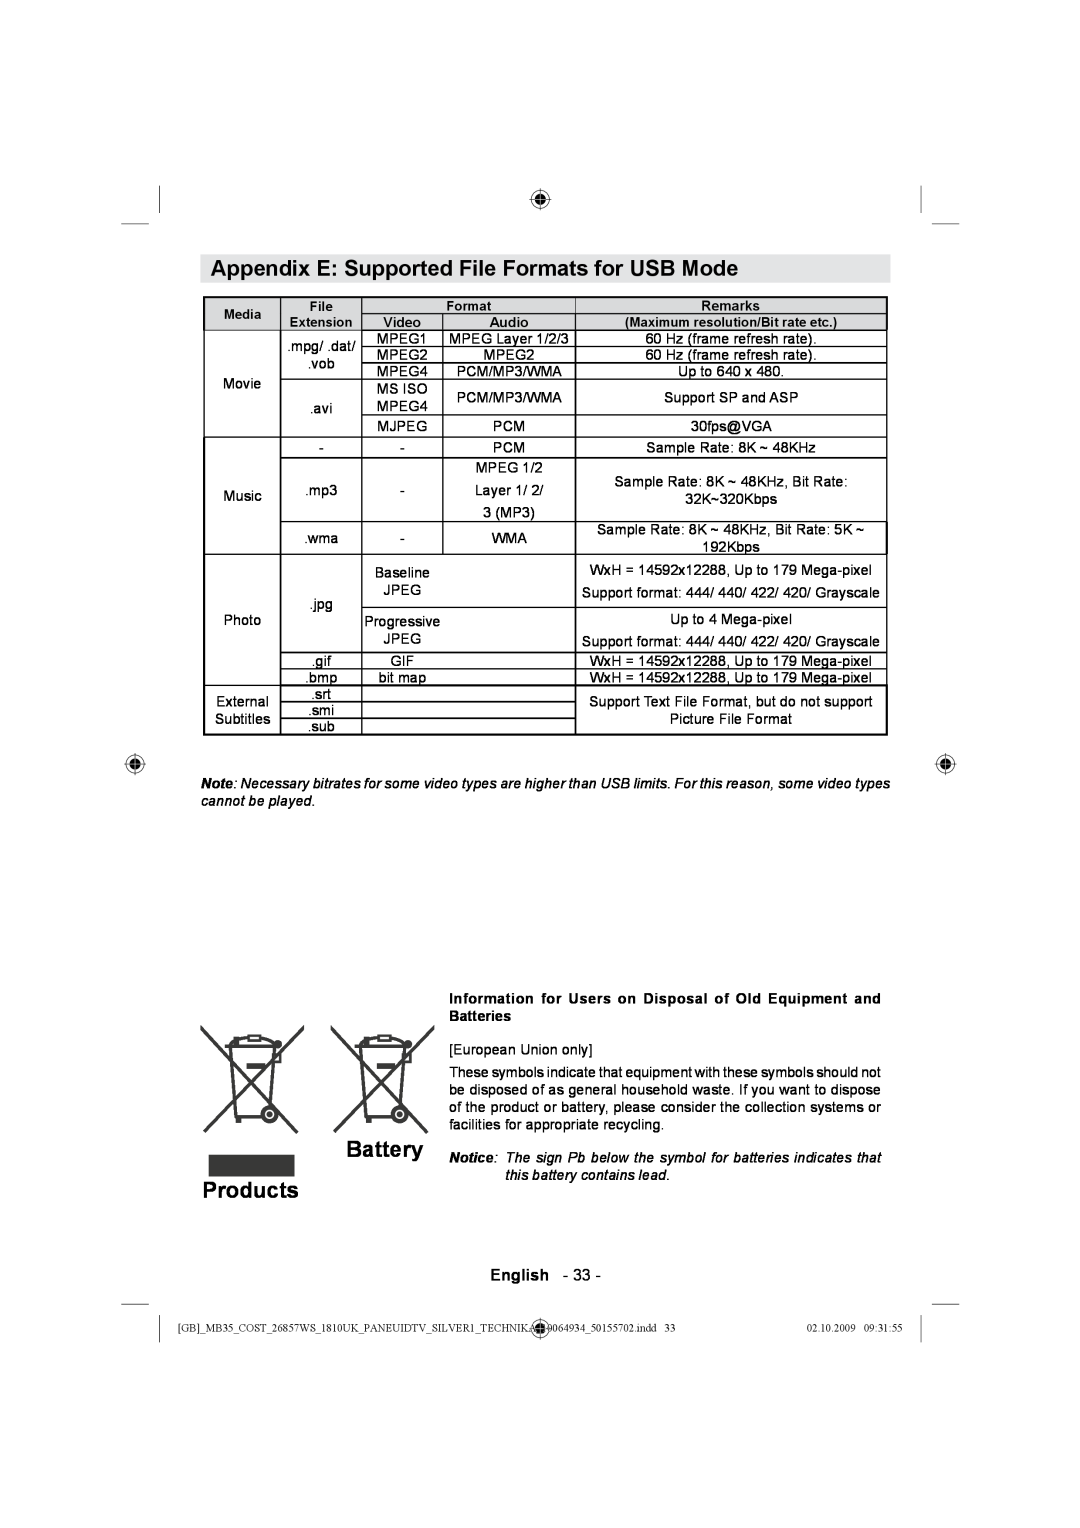 Technika LCD26-920 manual Appendix E Supported File Formats for USB Mode, Products, English 